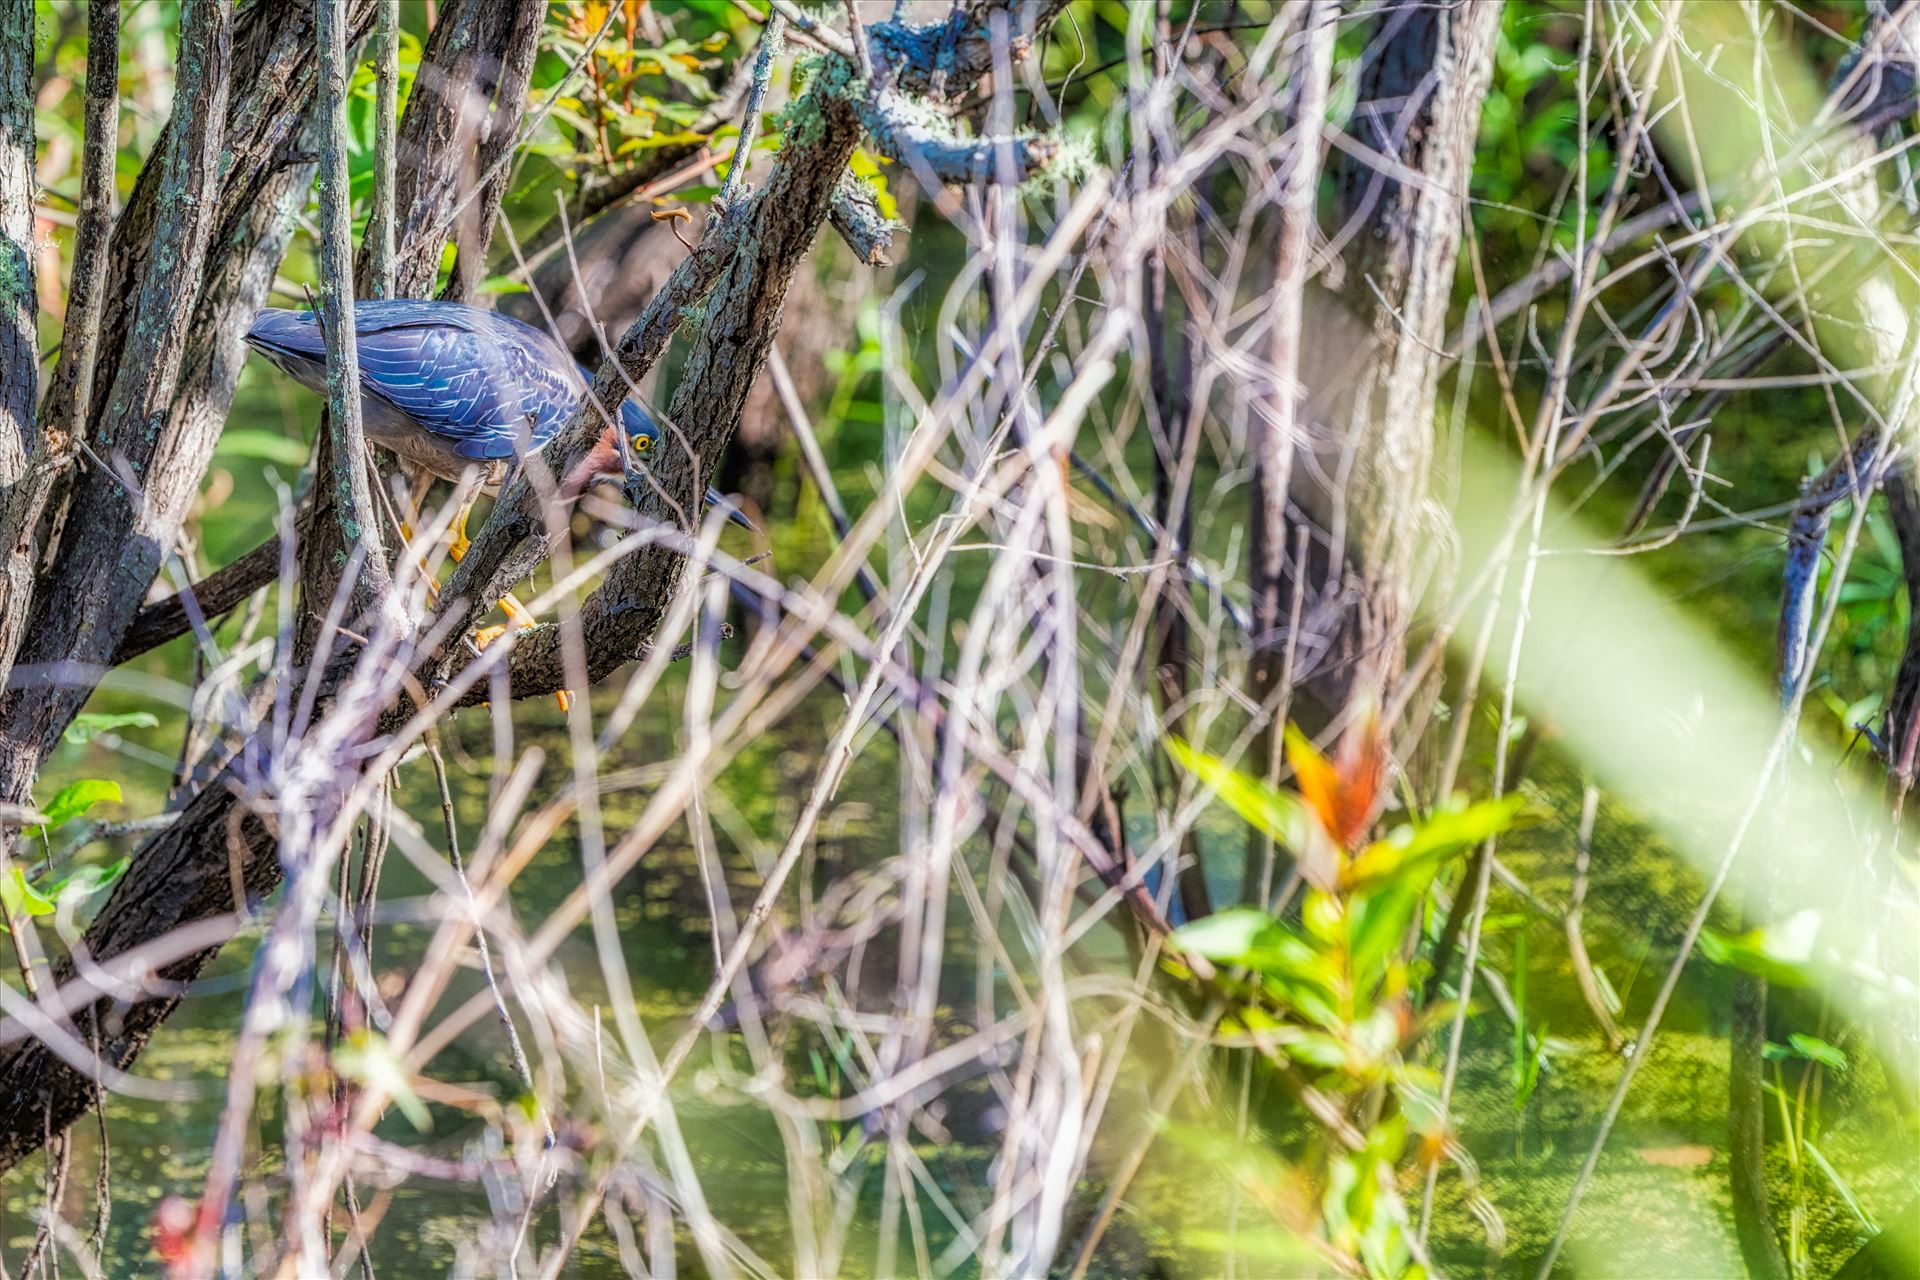 Green Heron - Green Heron stalking food in gator lake at St. Andrews State Park by Terry Kelly Photography